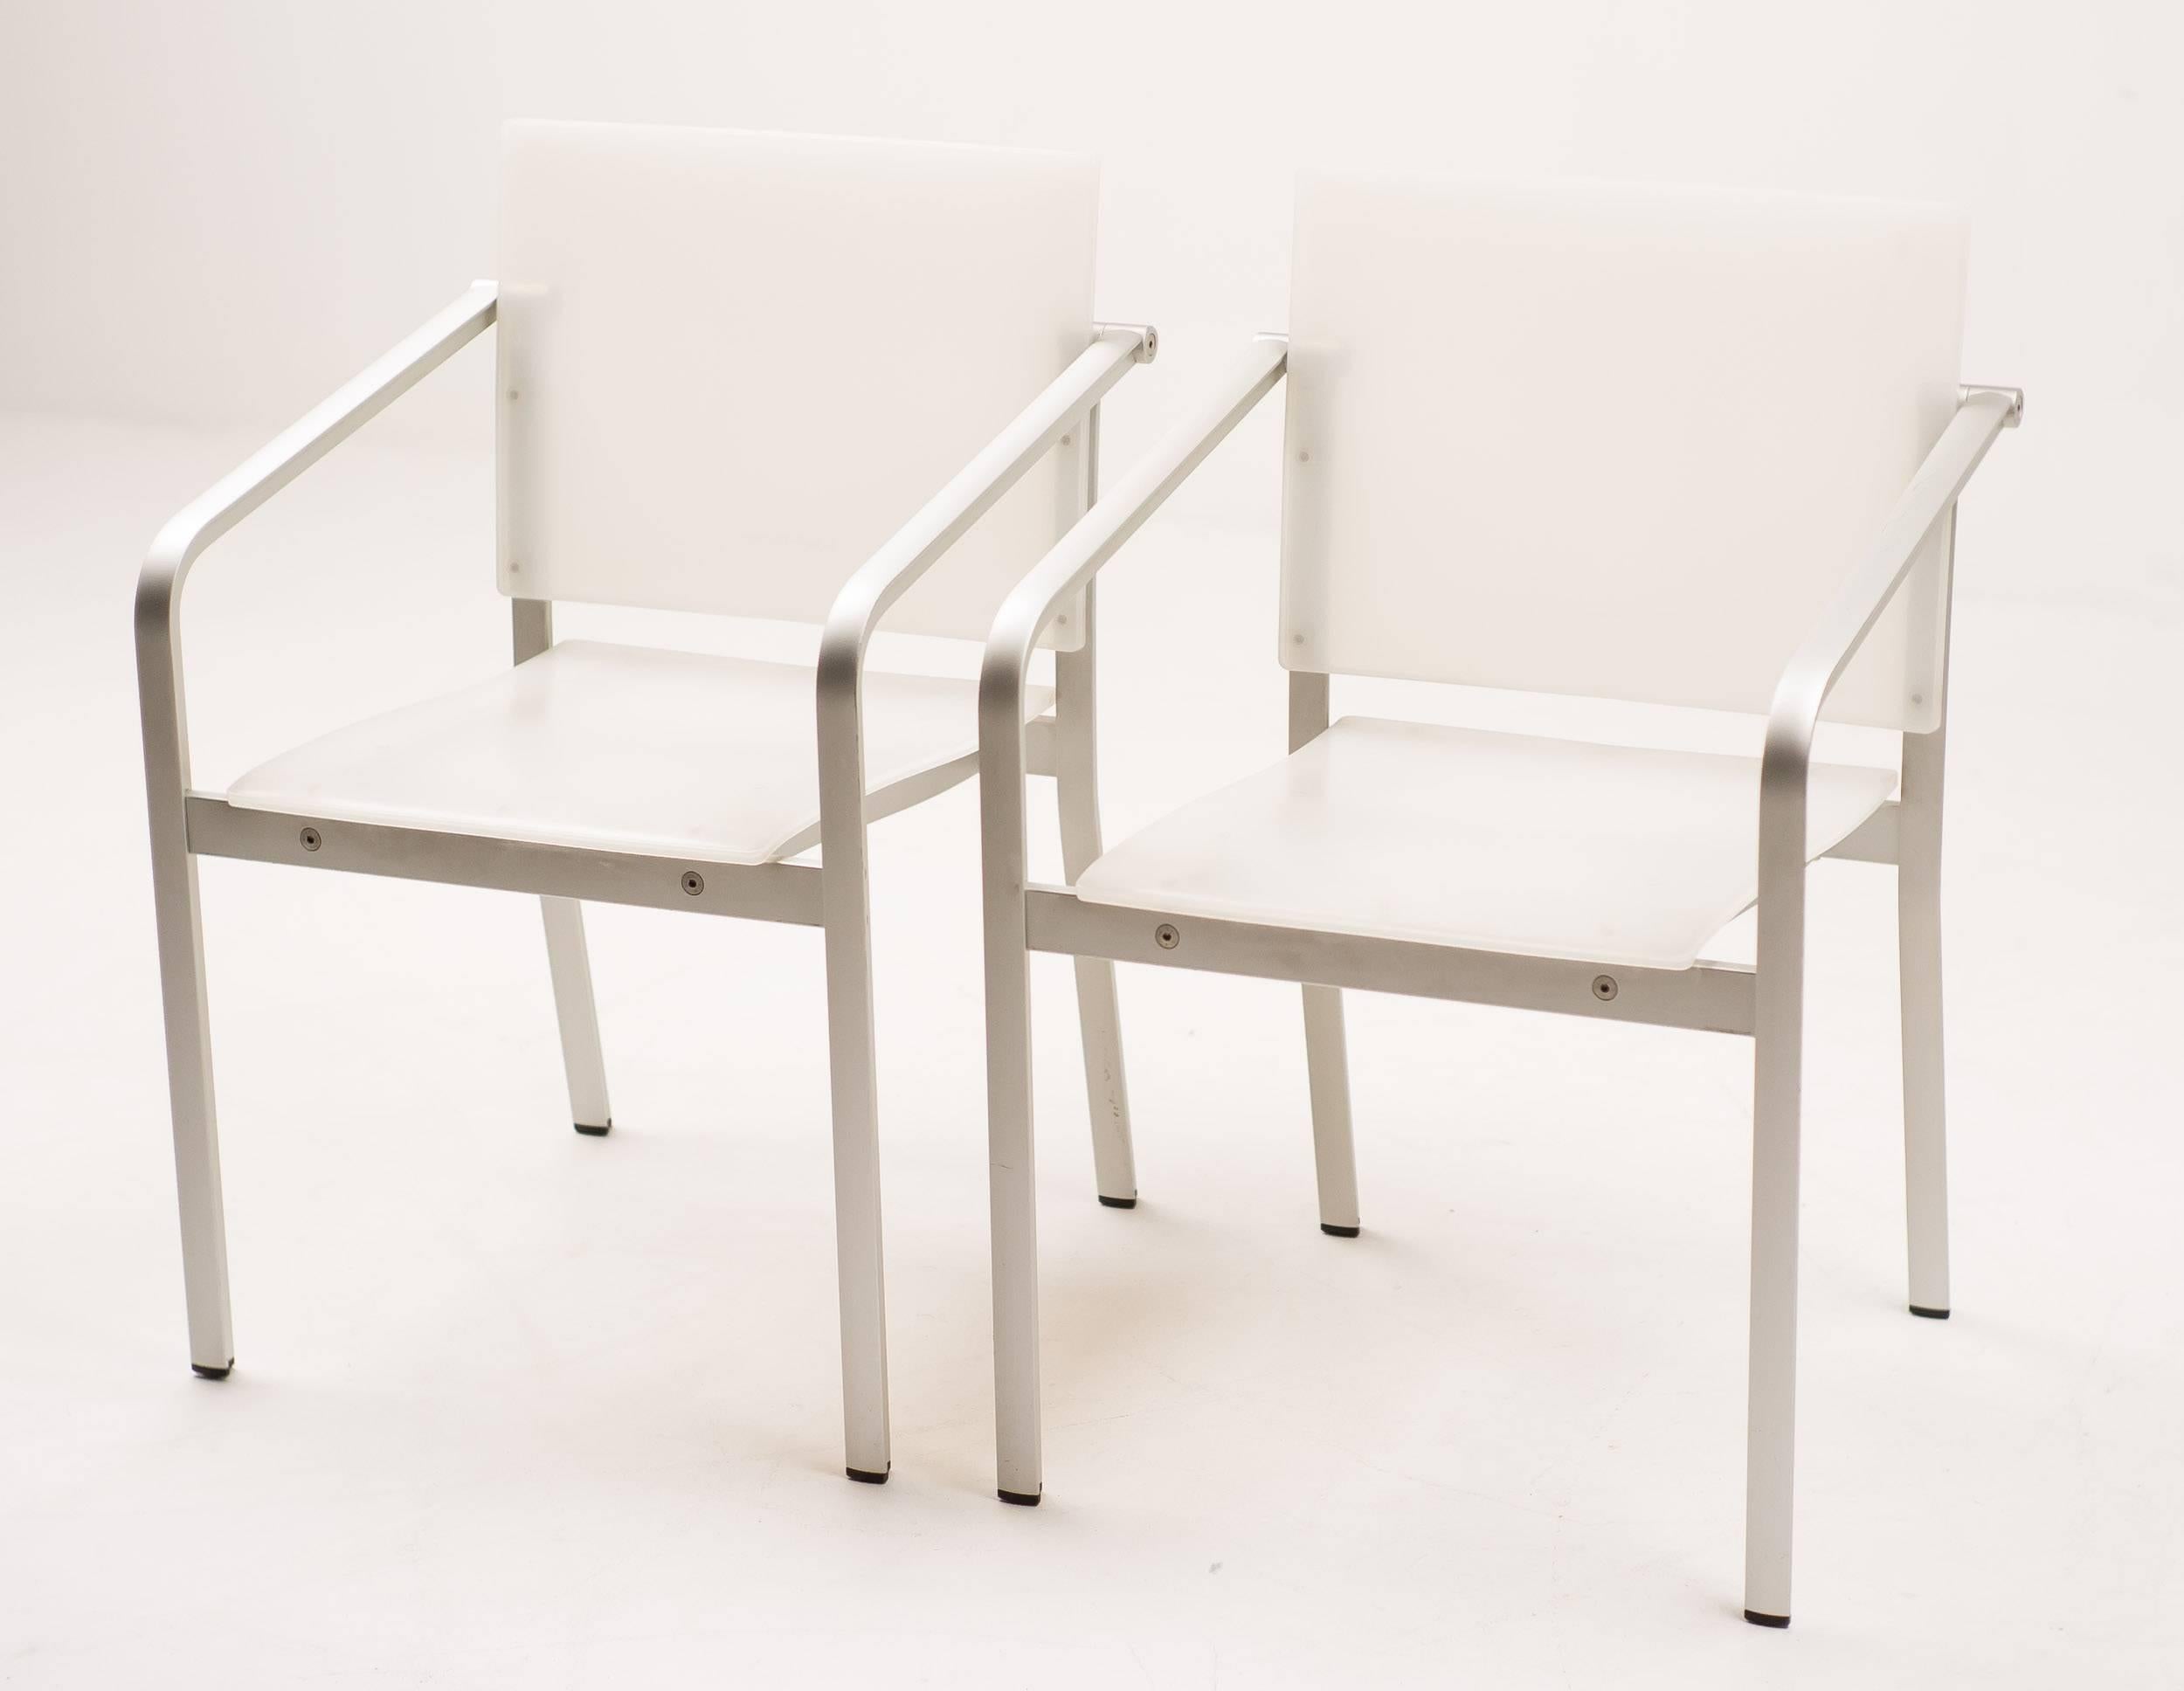 norman foster chairs